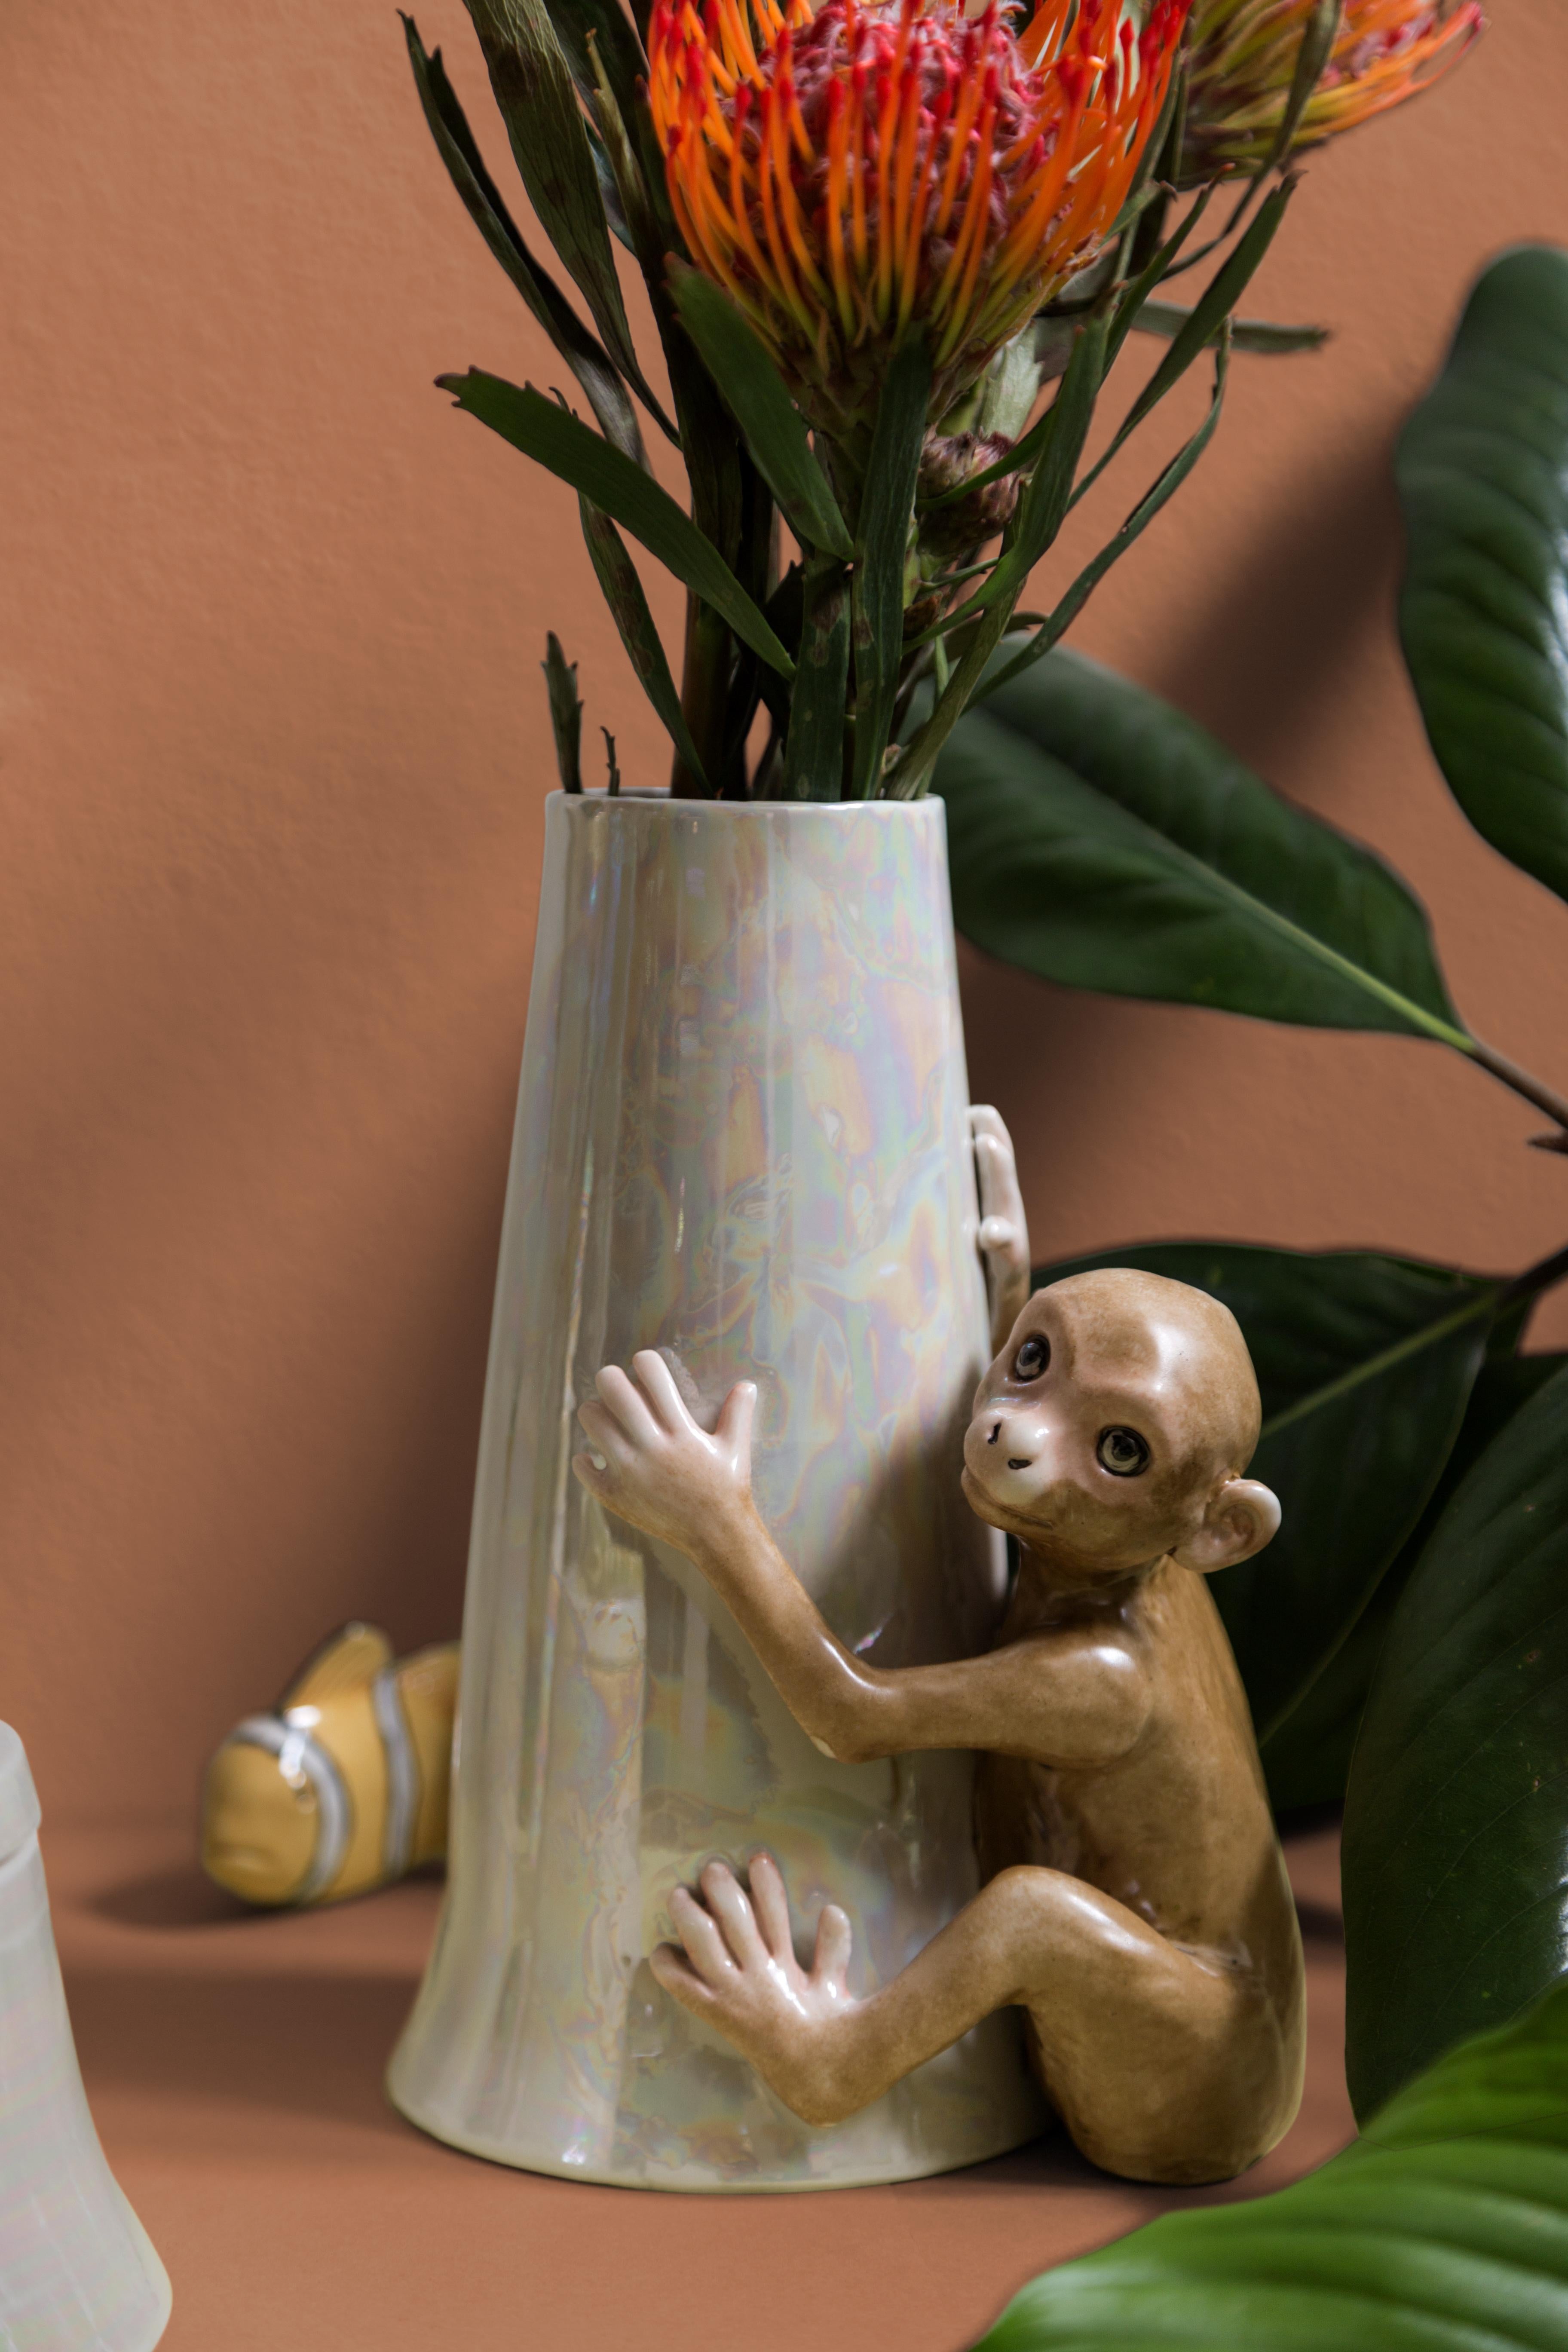 This Italian porcelain sculpture is part of Grand Tour by Vito Nesta. Made in Capodimonte porcelain with a glossy and iridescent finish. This vase is embellished by a hand painted monkey.